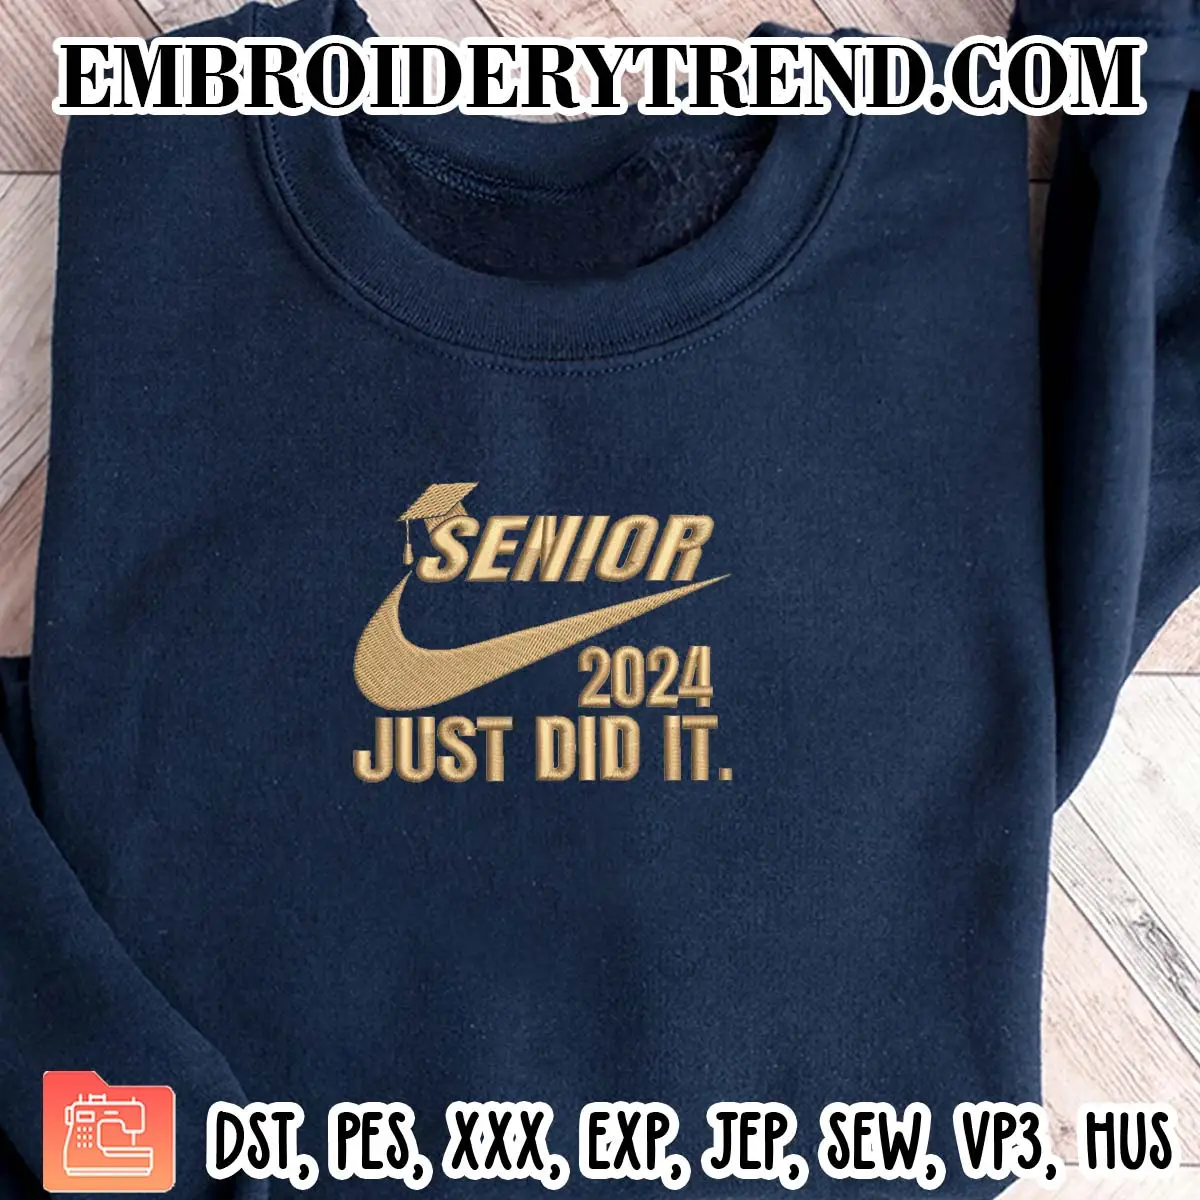 Senior 2024 Just Did It Nike Logo Embroidery Design, Graduation 2024 Machine Embroidery Digitized Pes Files